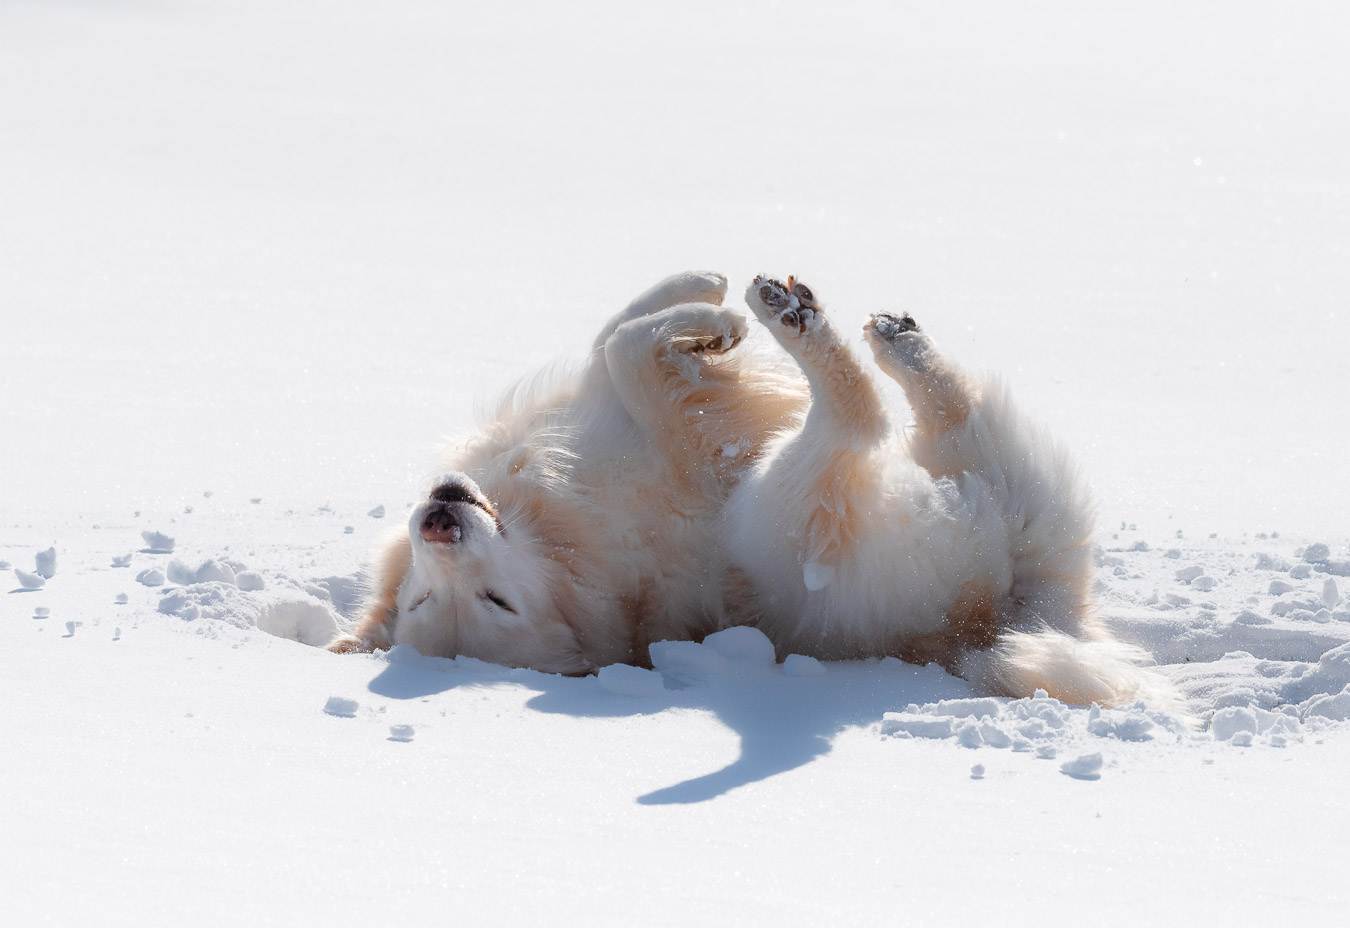 Golden Retriever playing in the snow